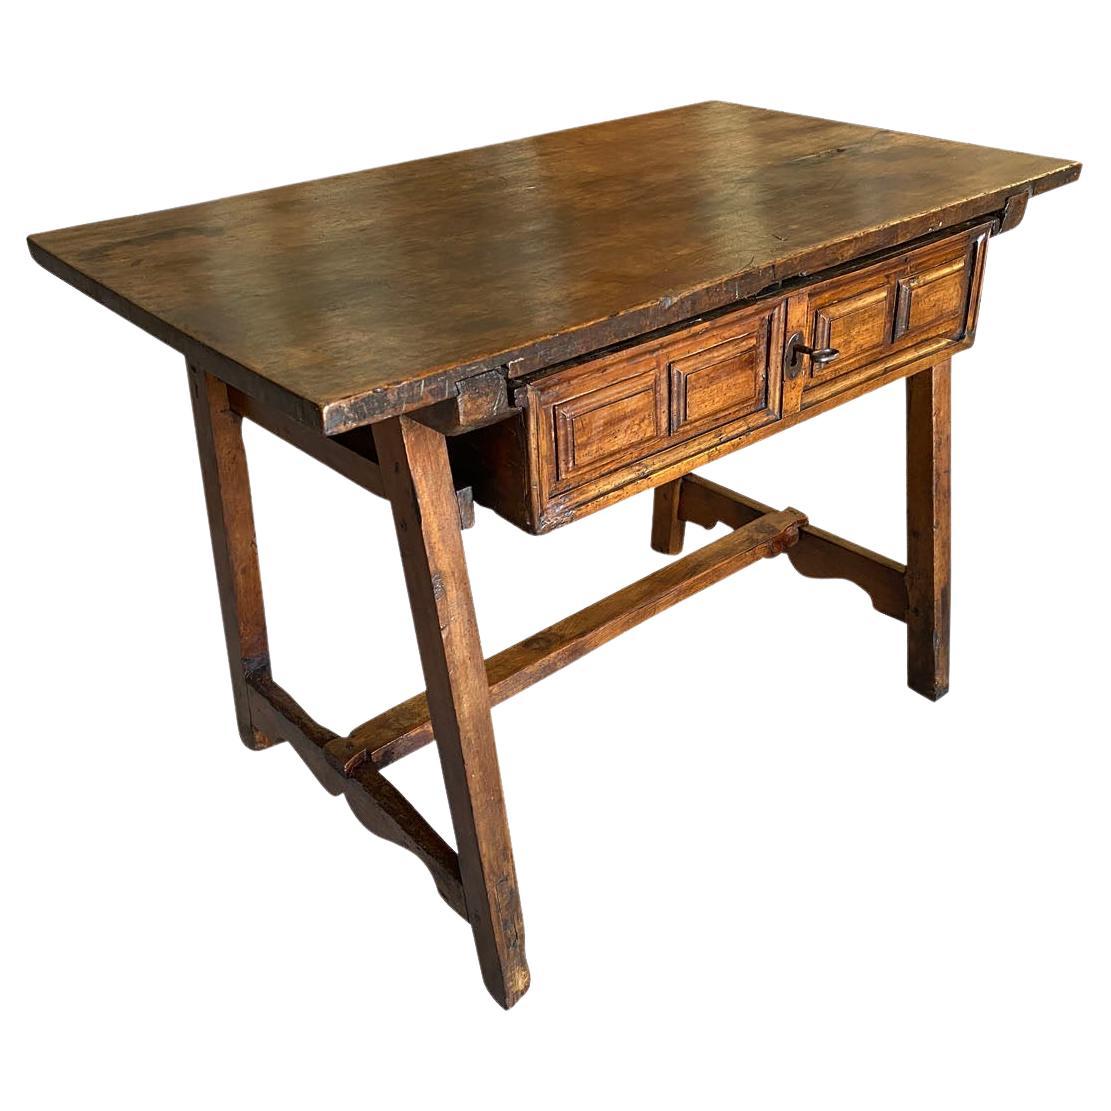 A very handsome early 18th century Italian Side Table - Writing Table.  Beautifully constructed from walnut with a wonderful solid board top, a single drawer and slightly splayed legs.  Excellent patina - warm and luminous. 